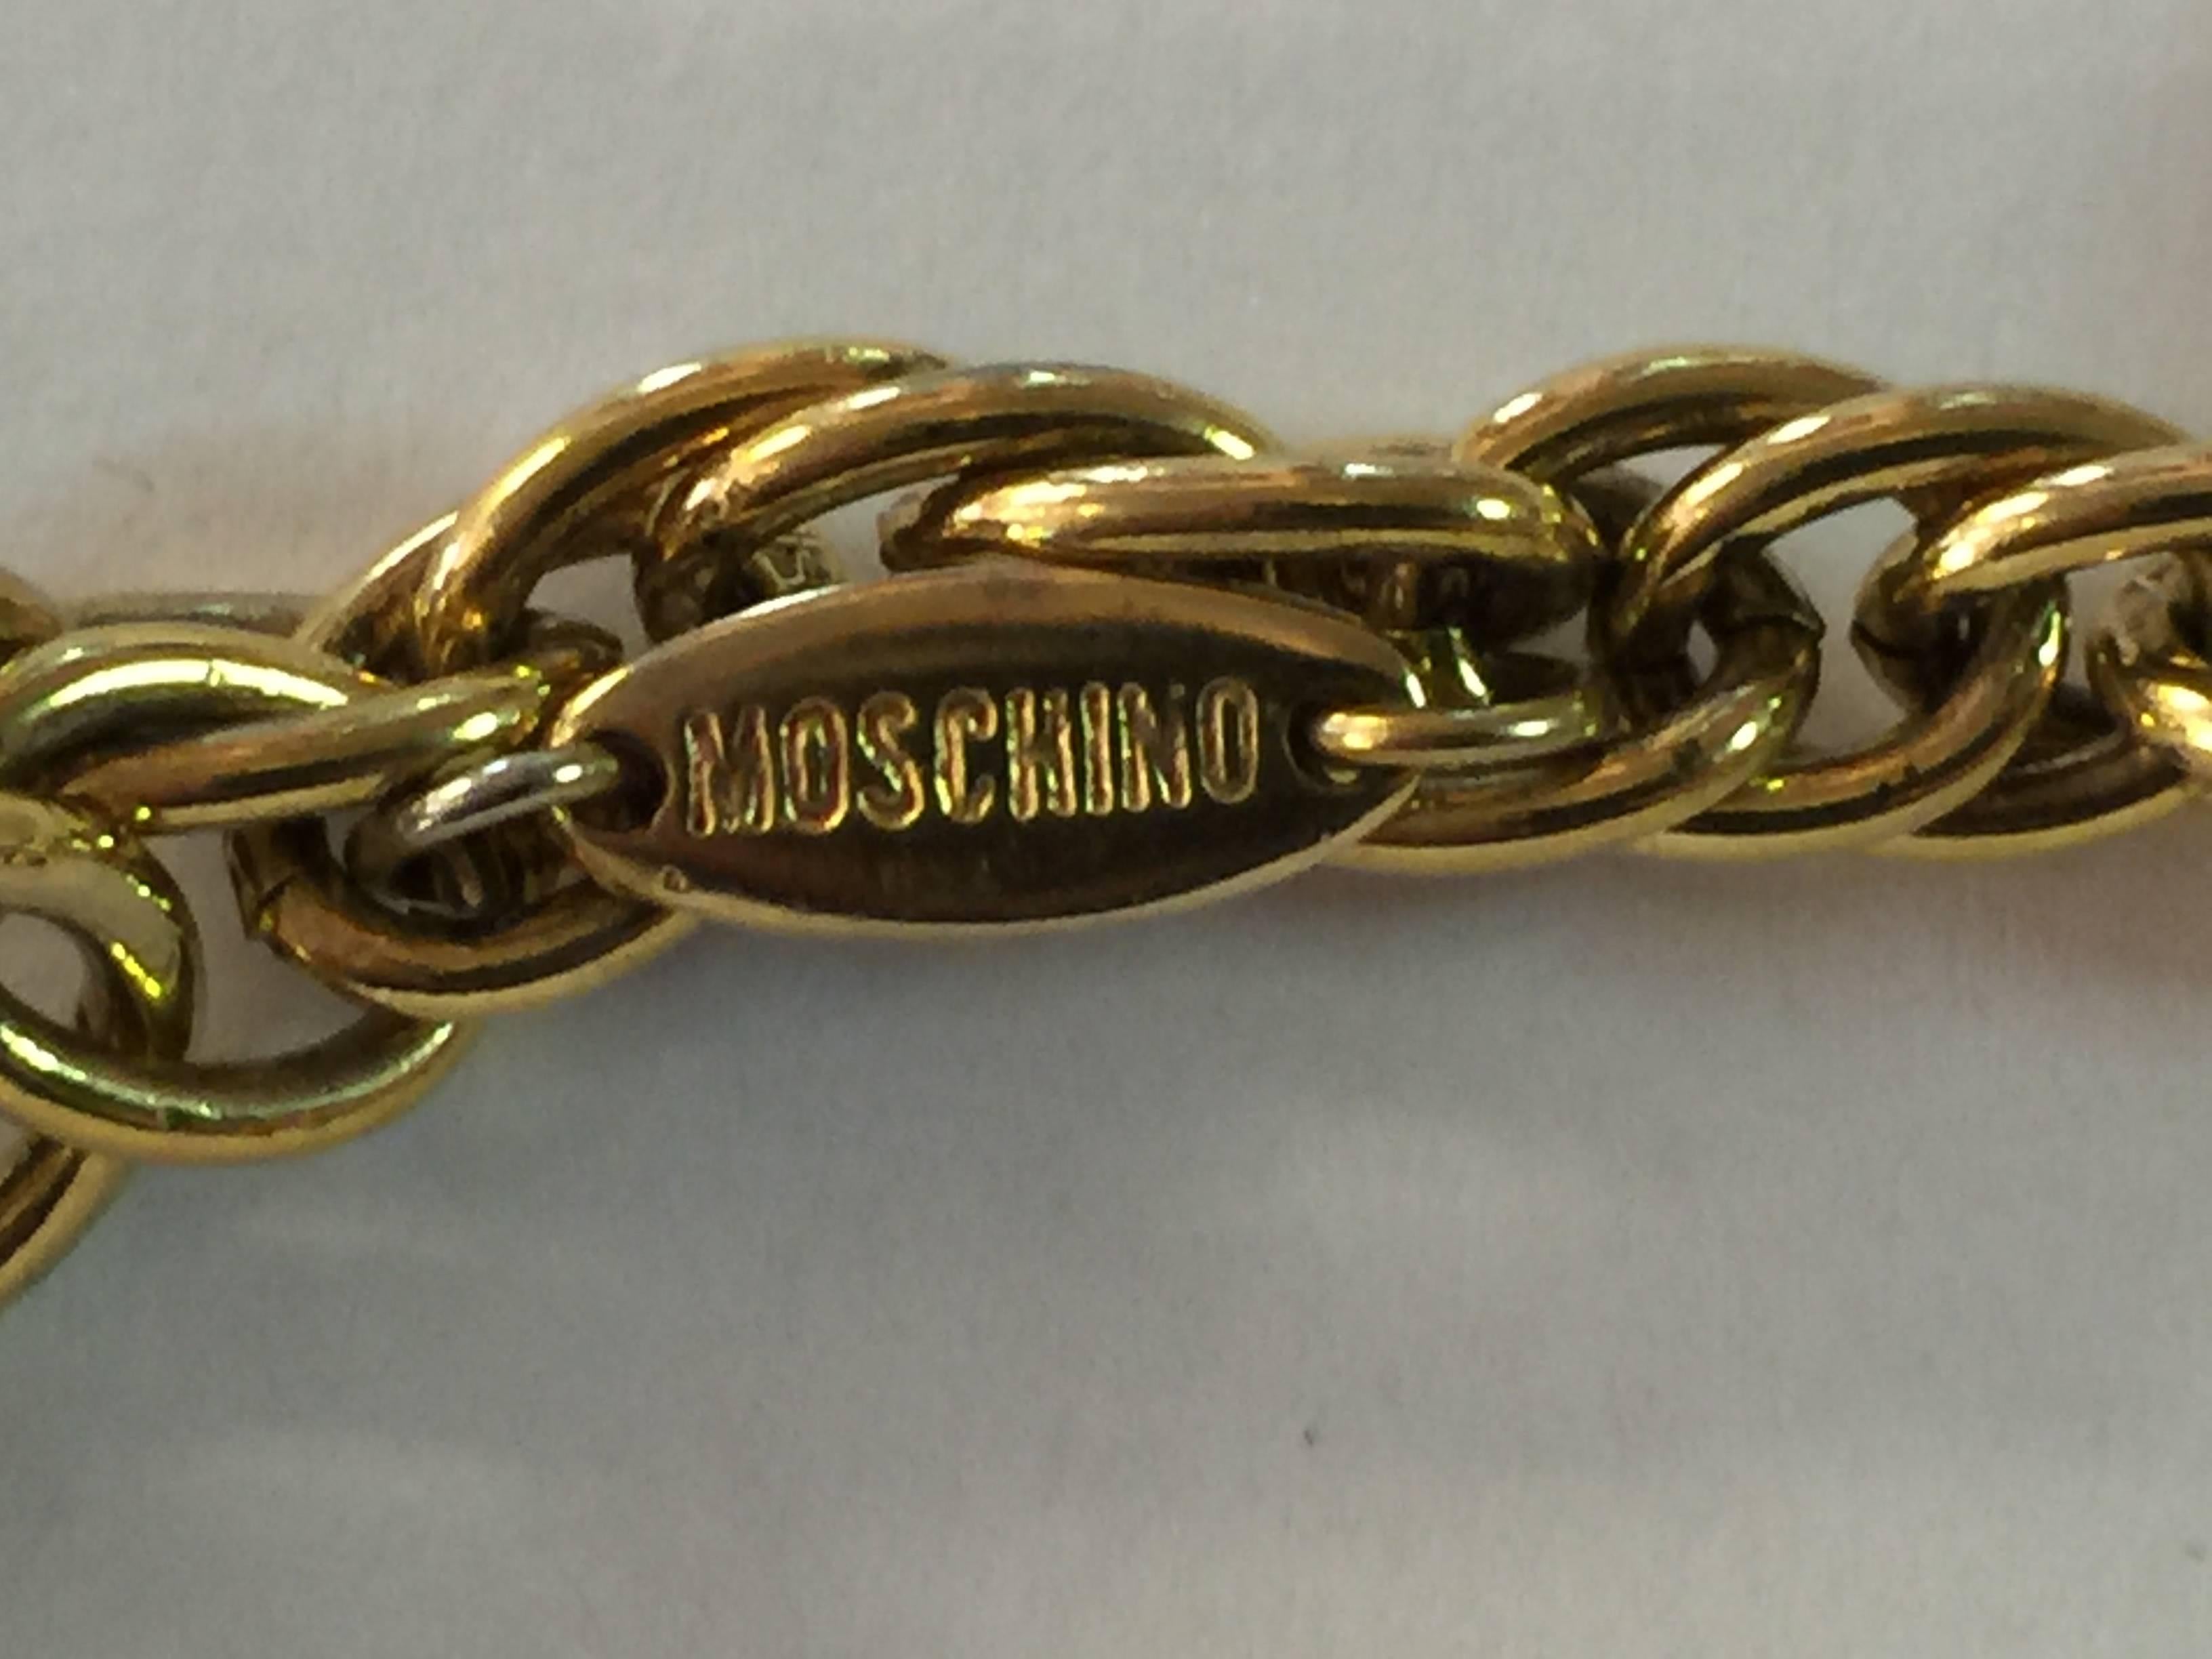 1990s  MOSCHINO Enamel and Goldtone Question Mark/Heart Charm Bracelet In Excellent Condition For Sale In Palm Springs, CA